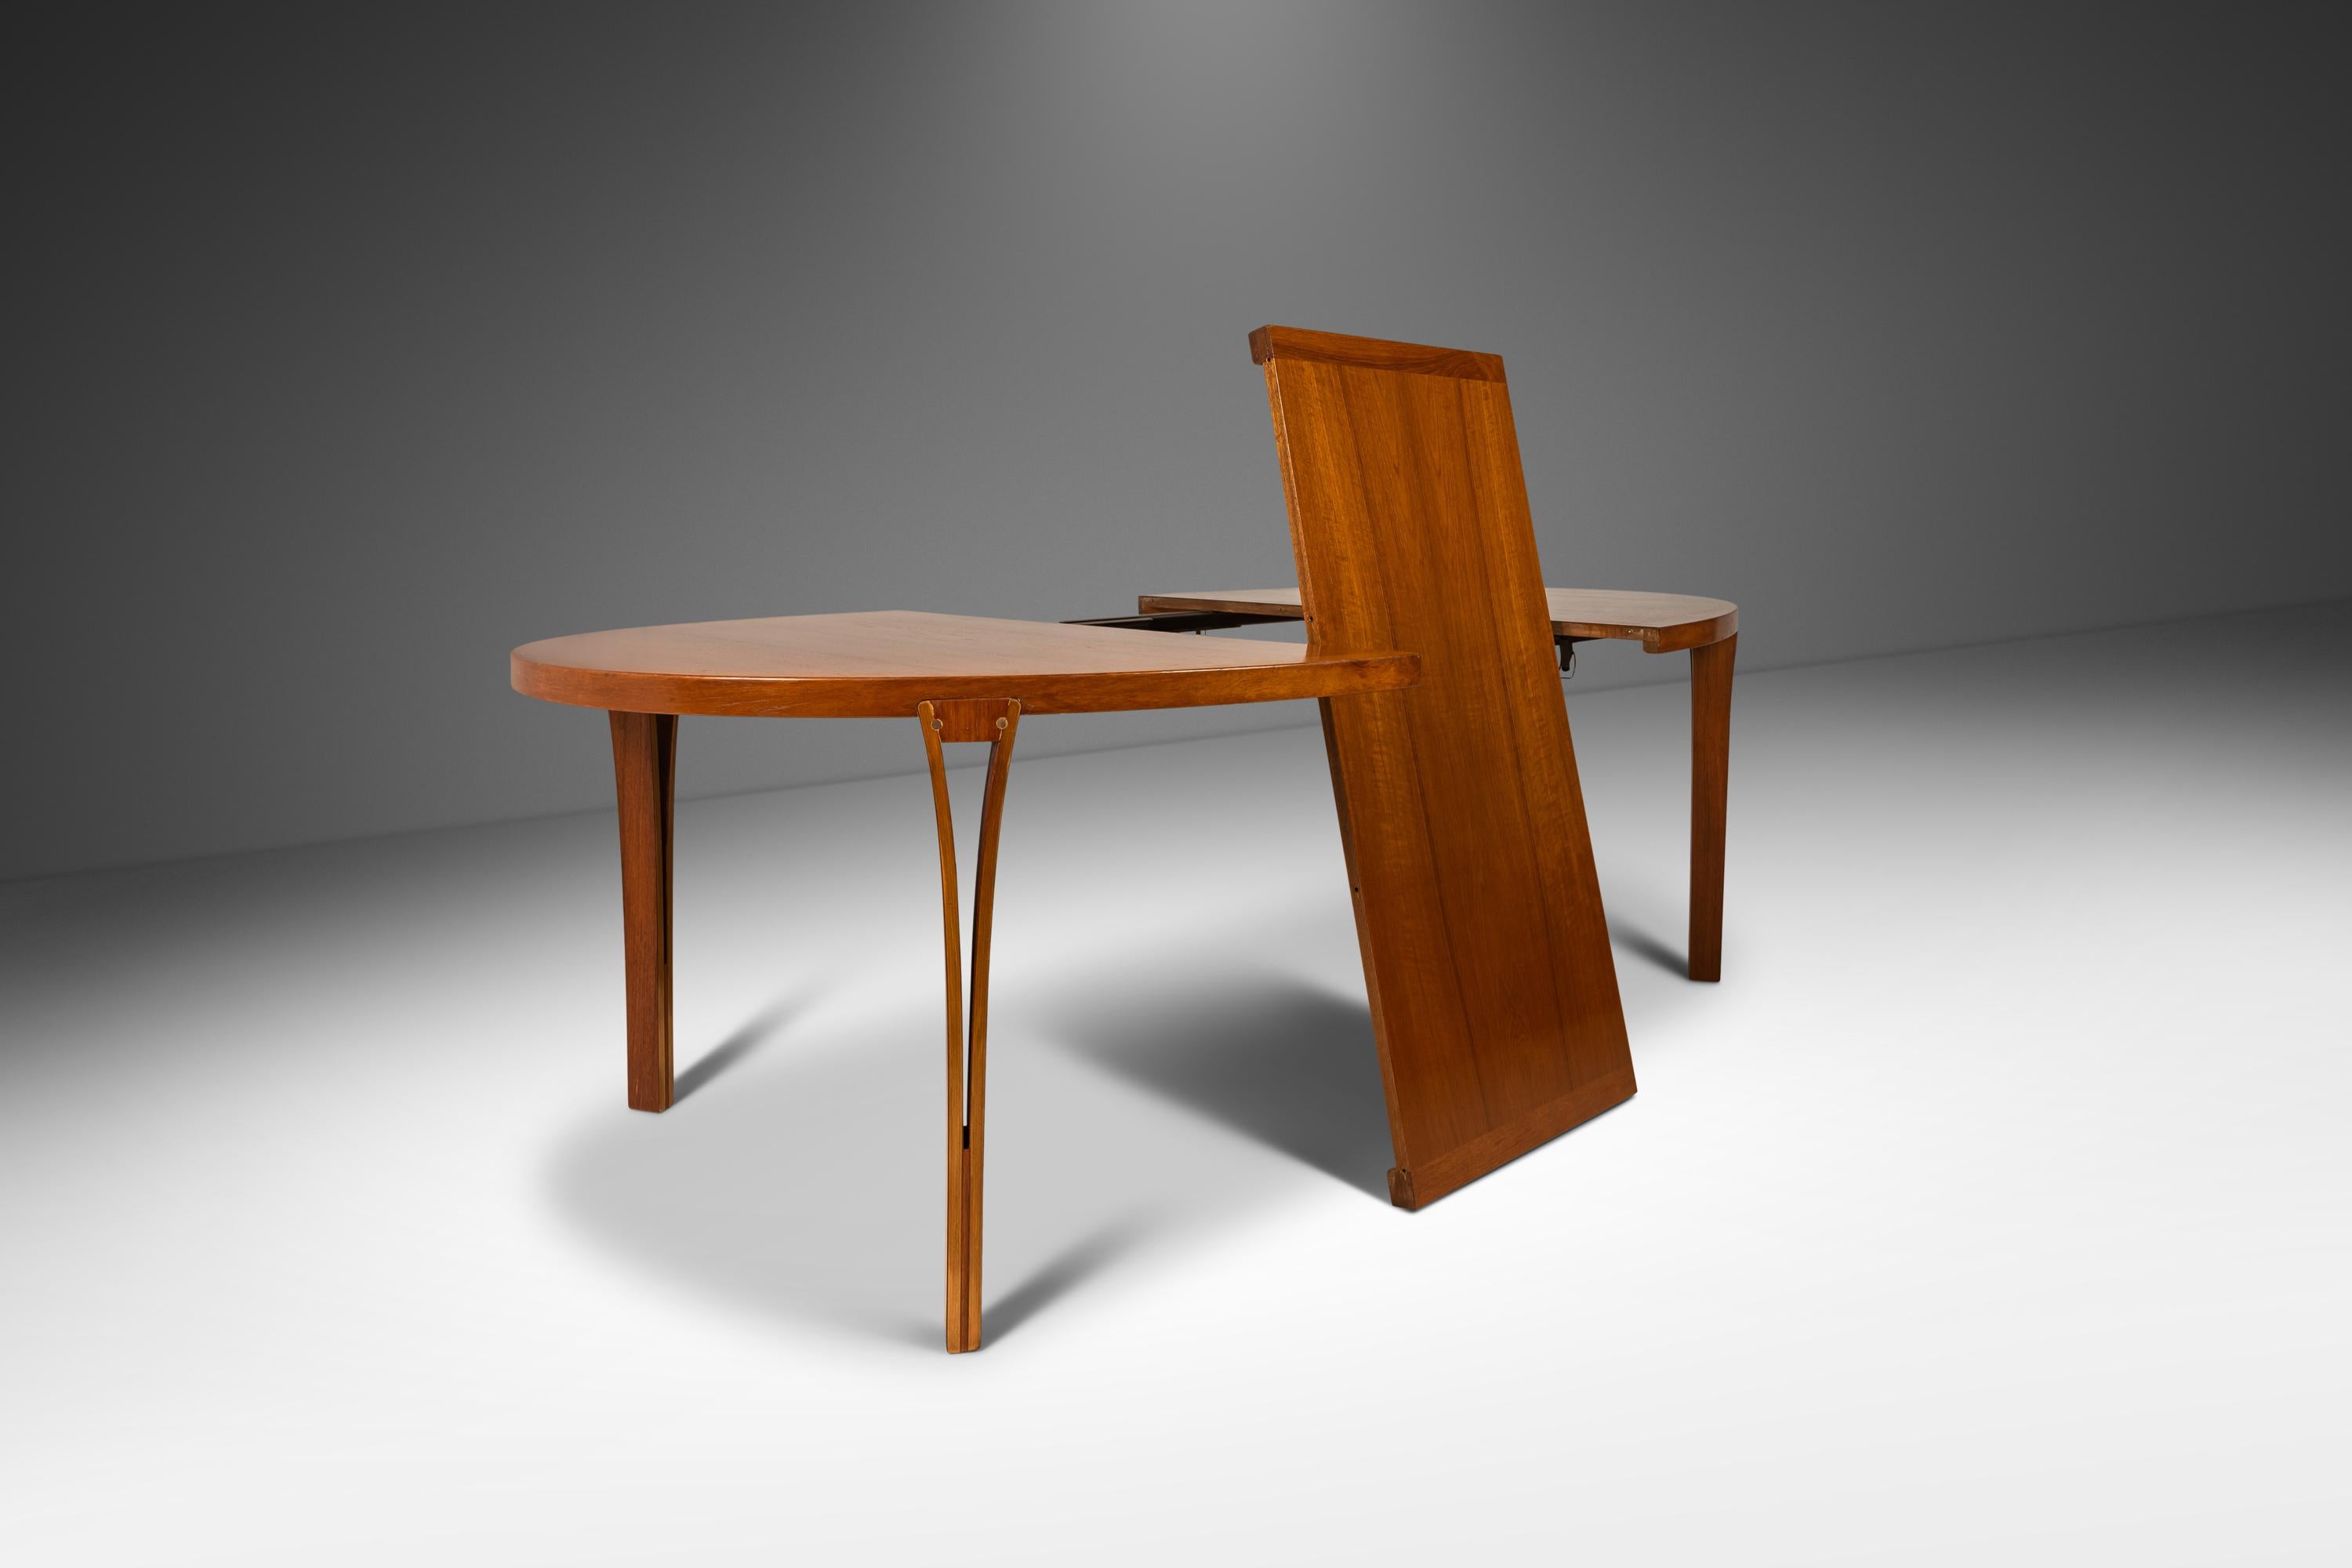 Introducing a rare and exquisite expansion dining table by the renowned Sven Ellekaer for Heltborg Møbler. Designed in the early 1960s, this stunning table is a true representation of mid-century modern design and craftsmanship.

Constructed from a